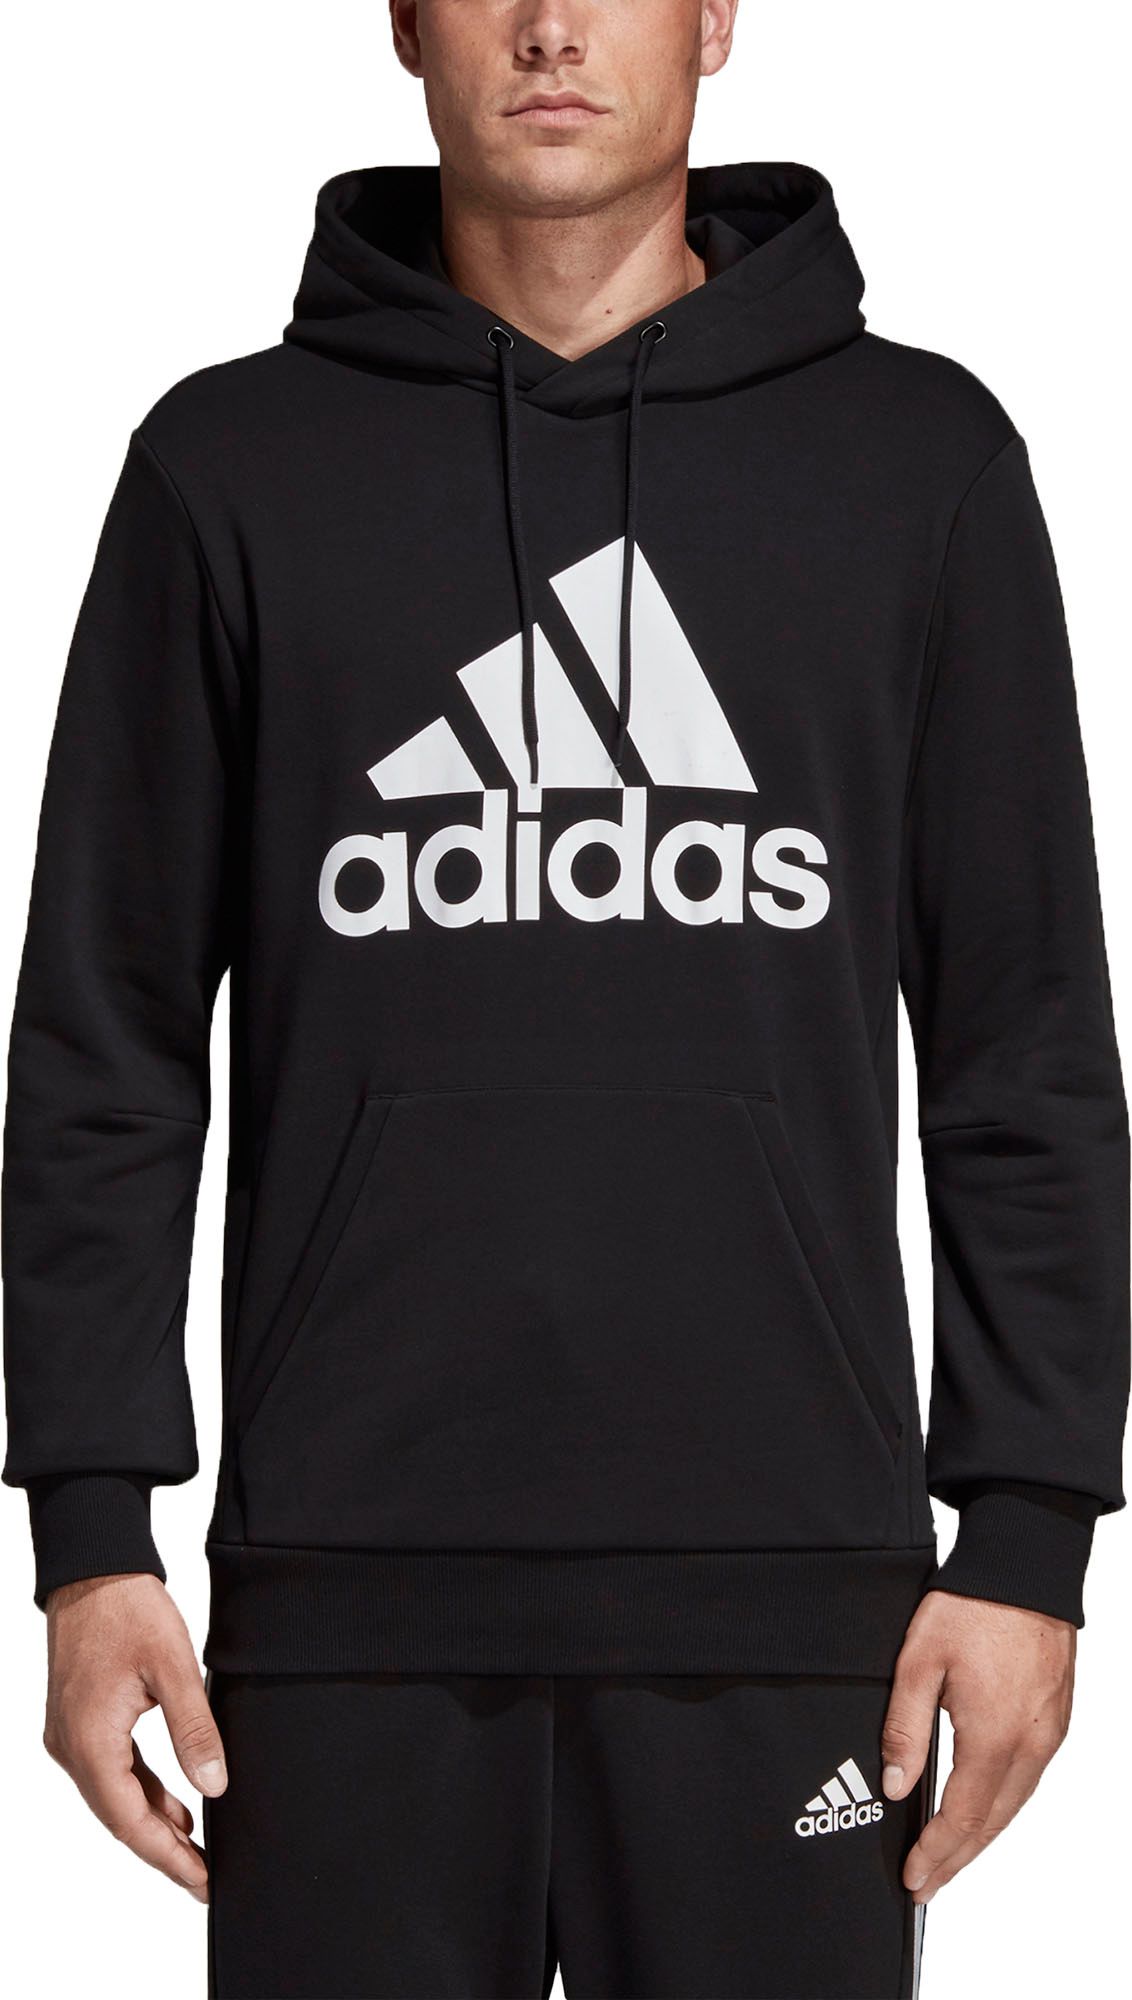 adidas only the best for the athlete hoodie